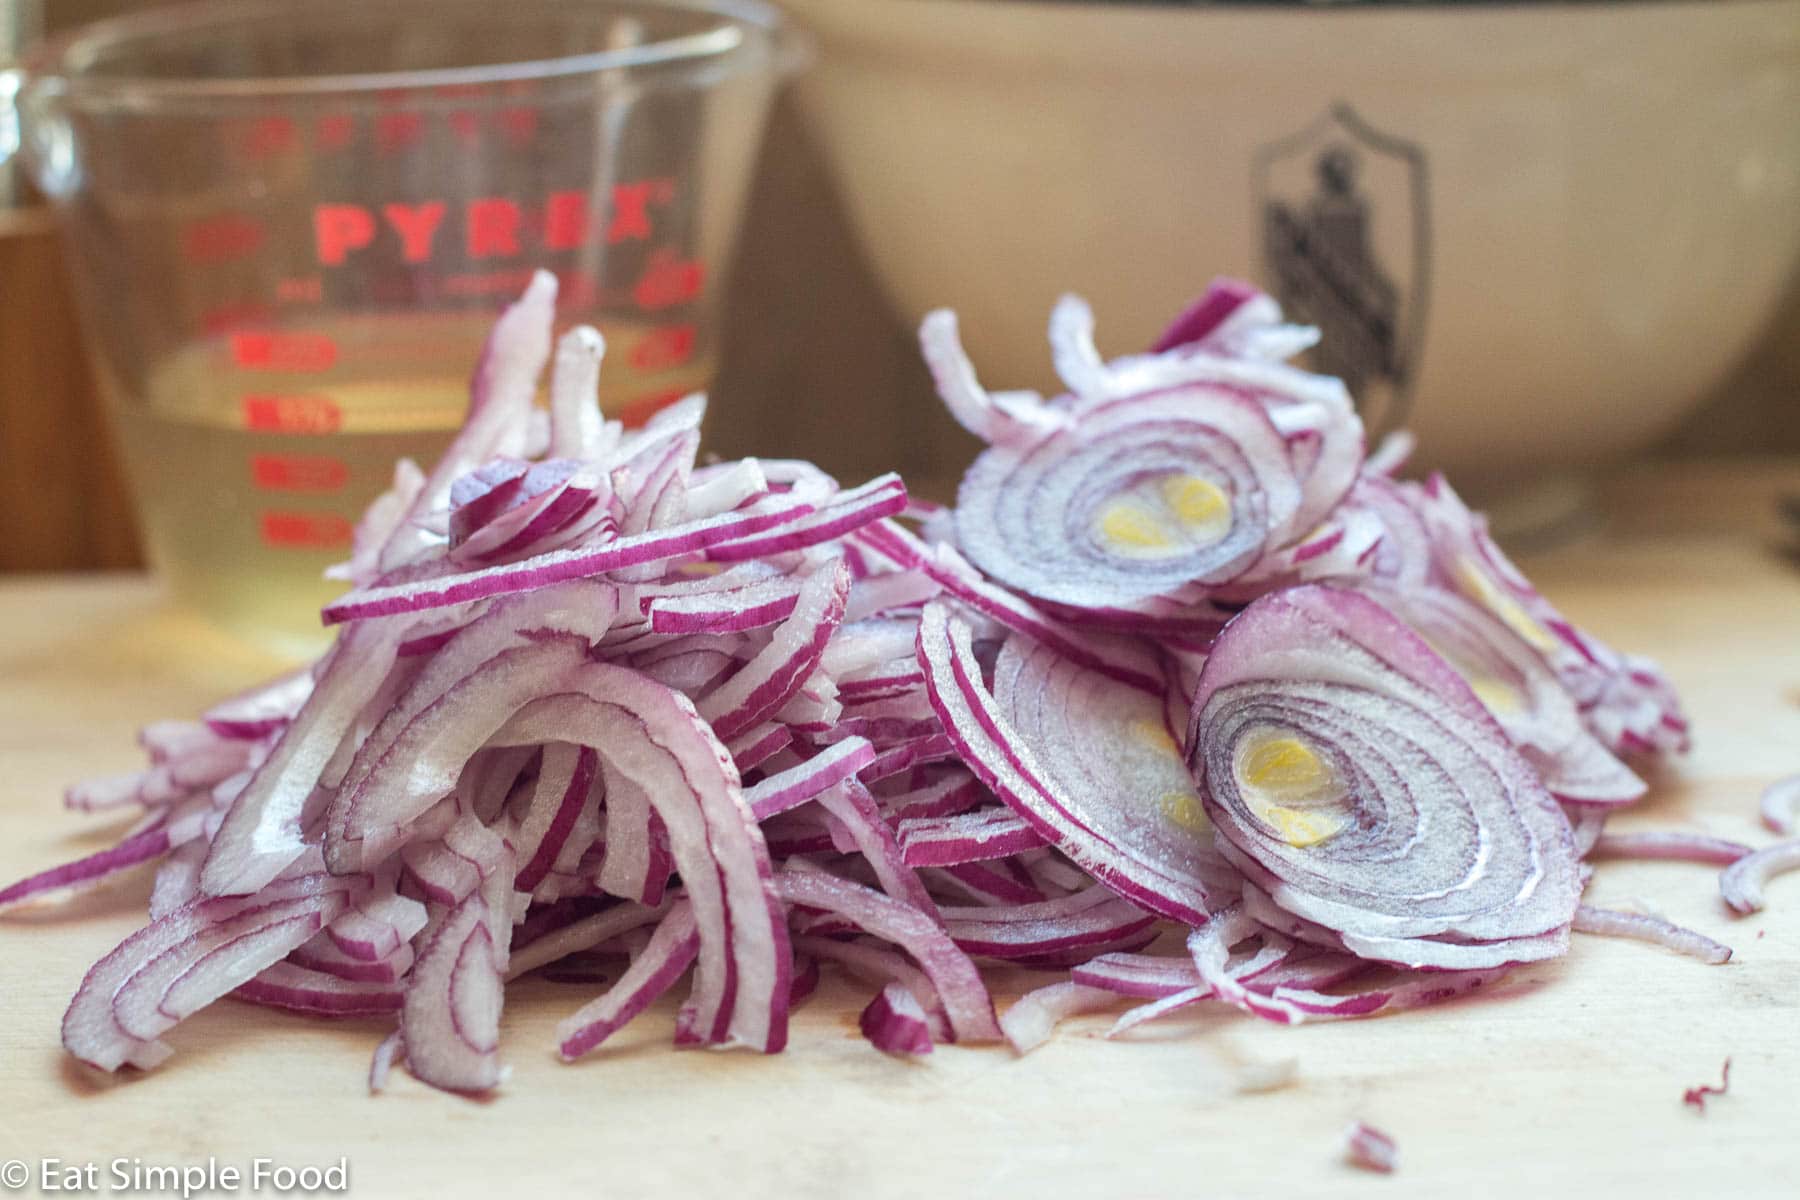 A pile of thin sliced red onions on a wood cutting board with a measuring cup of vinegar in the background.